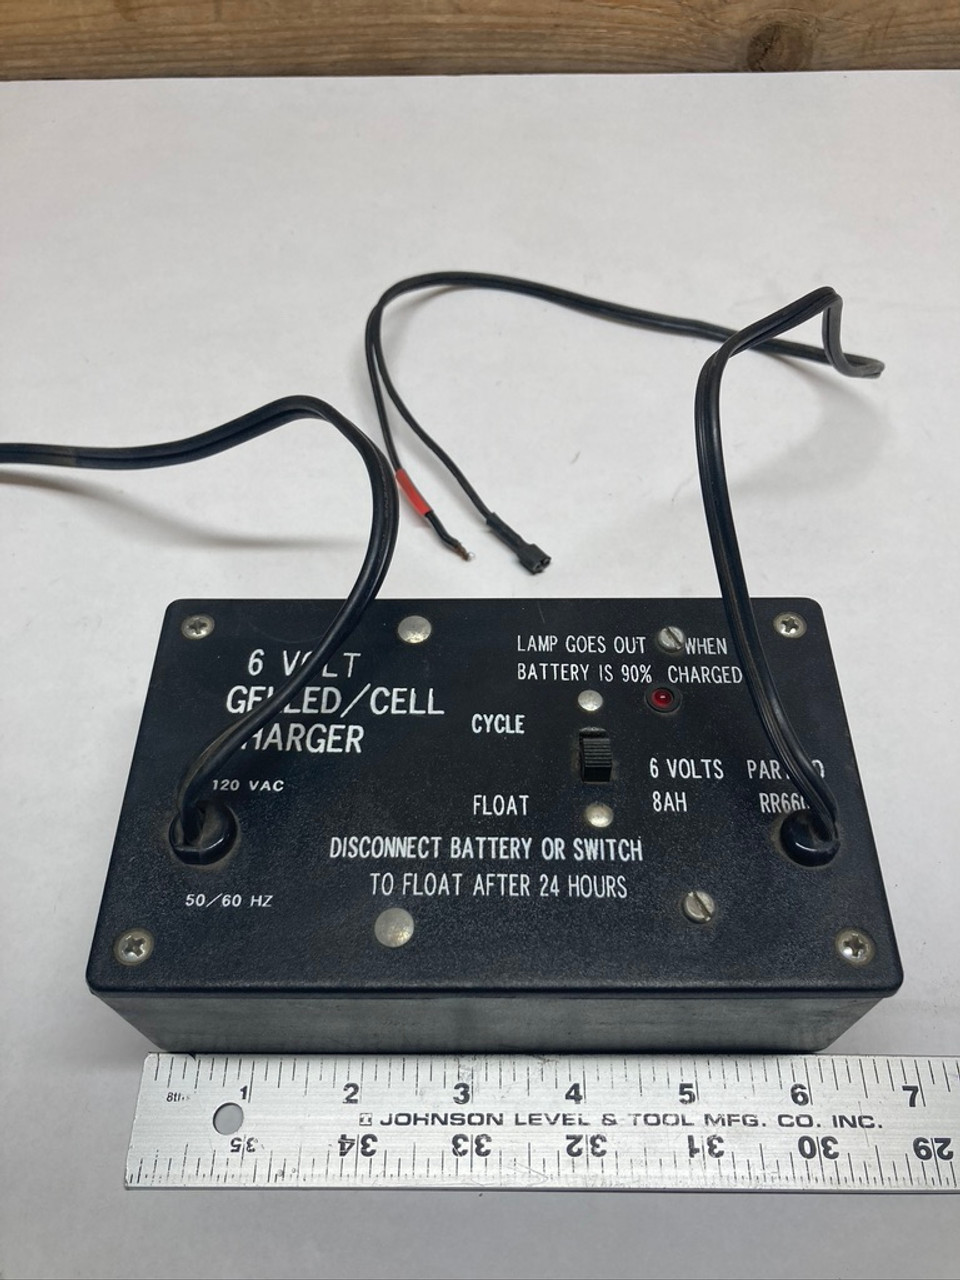 6 Volt Gel/Cell Charger RR6600M R & R Electronic